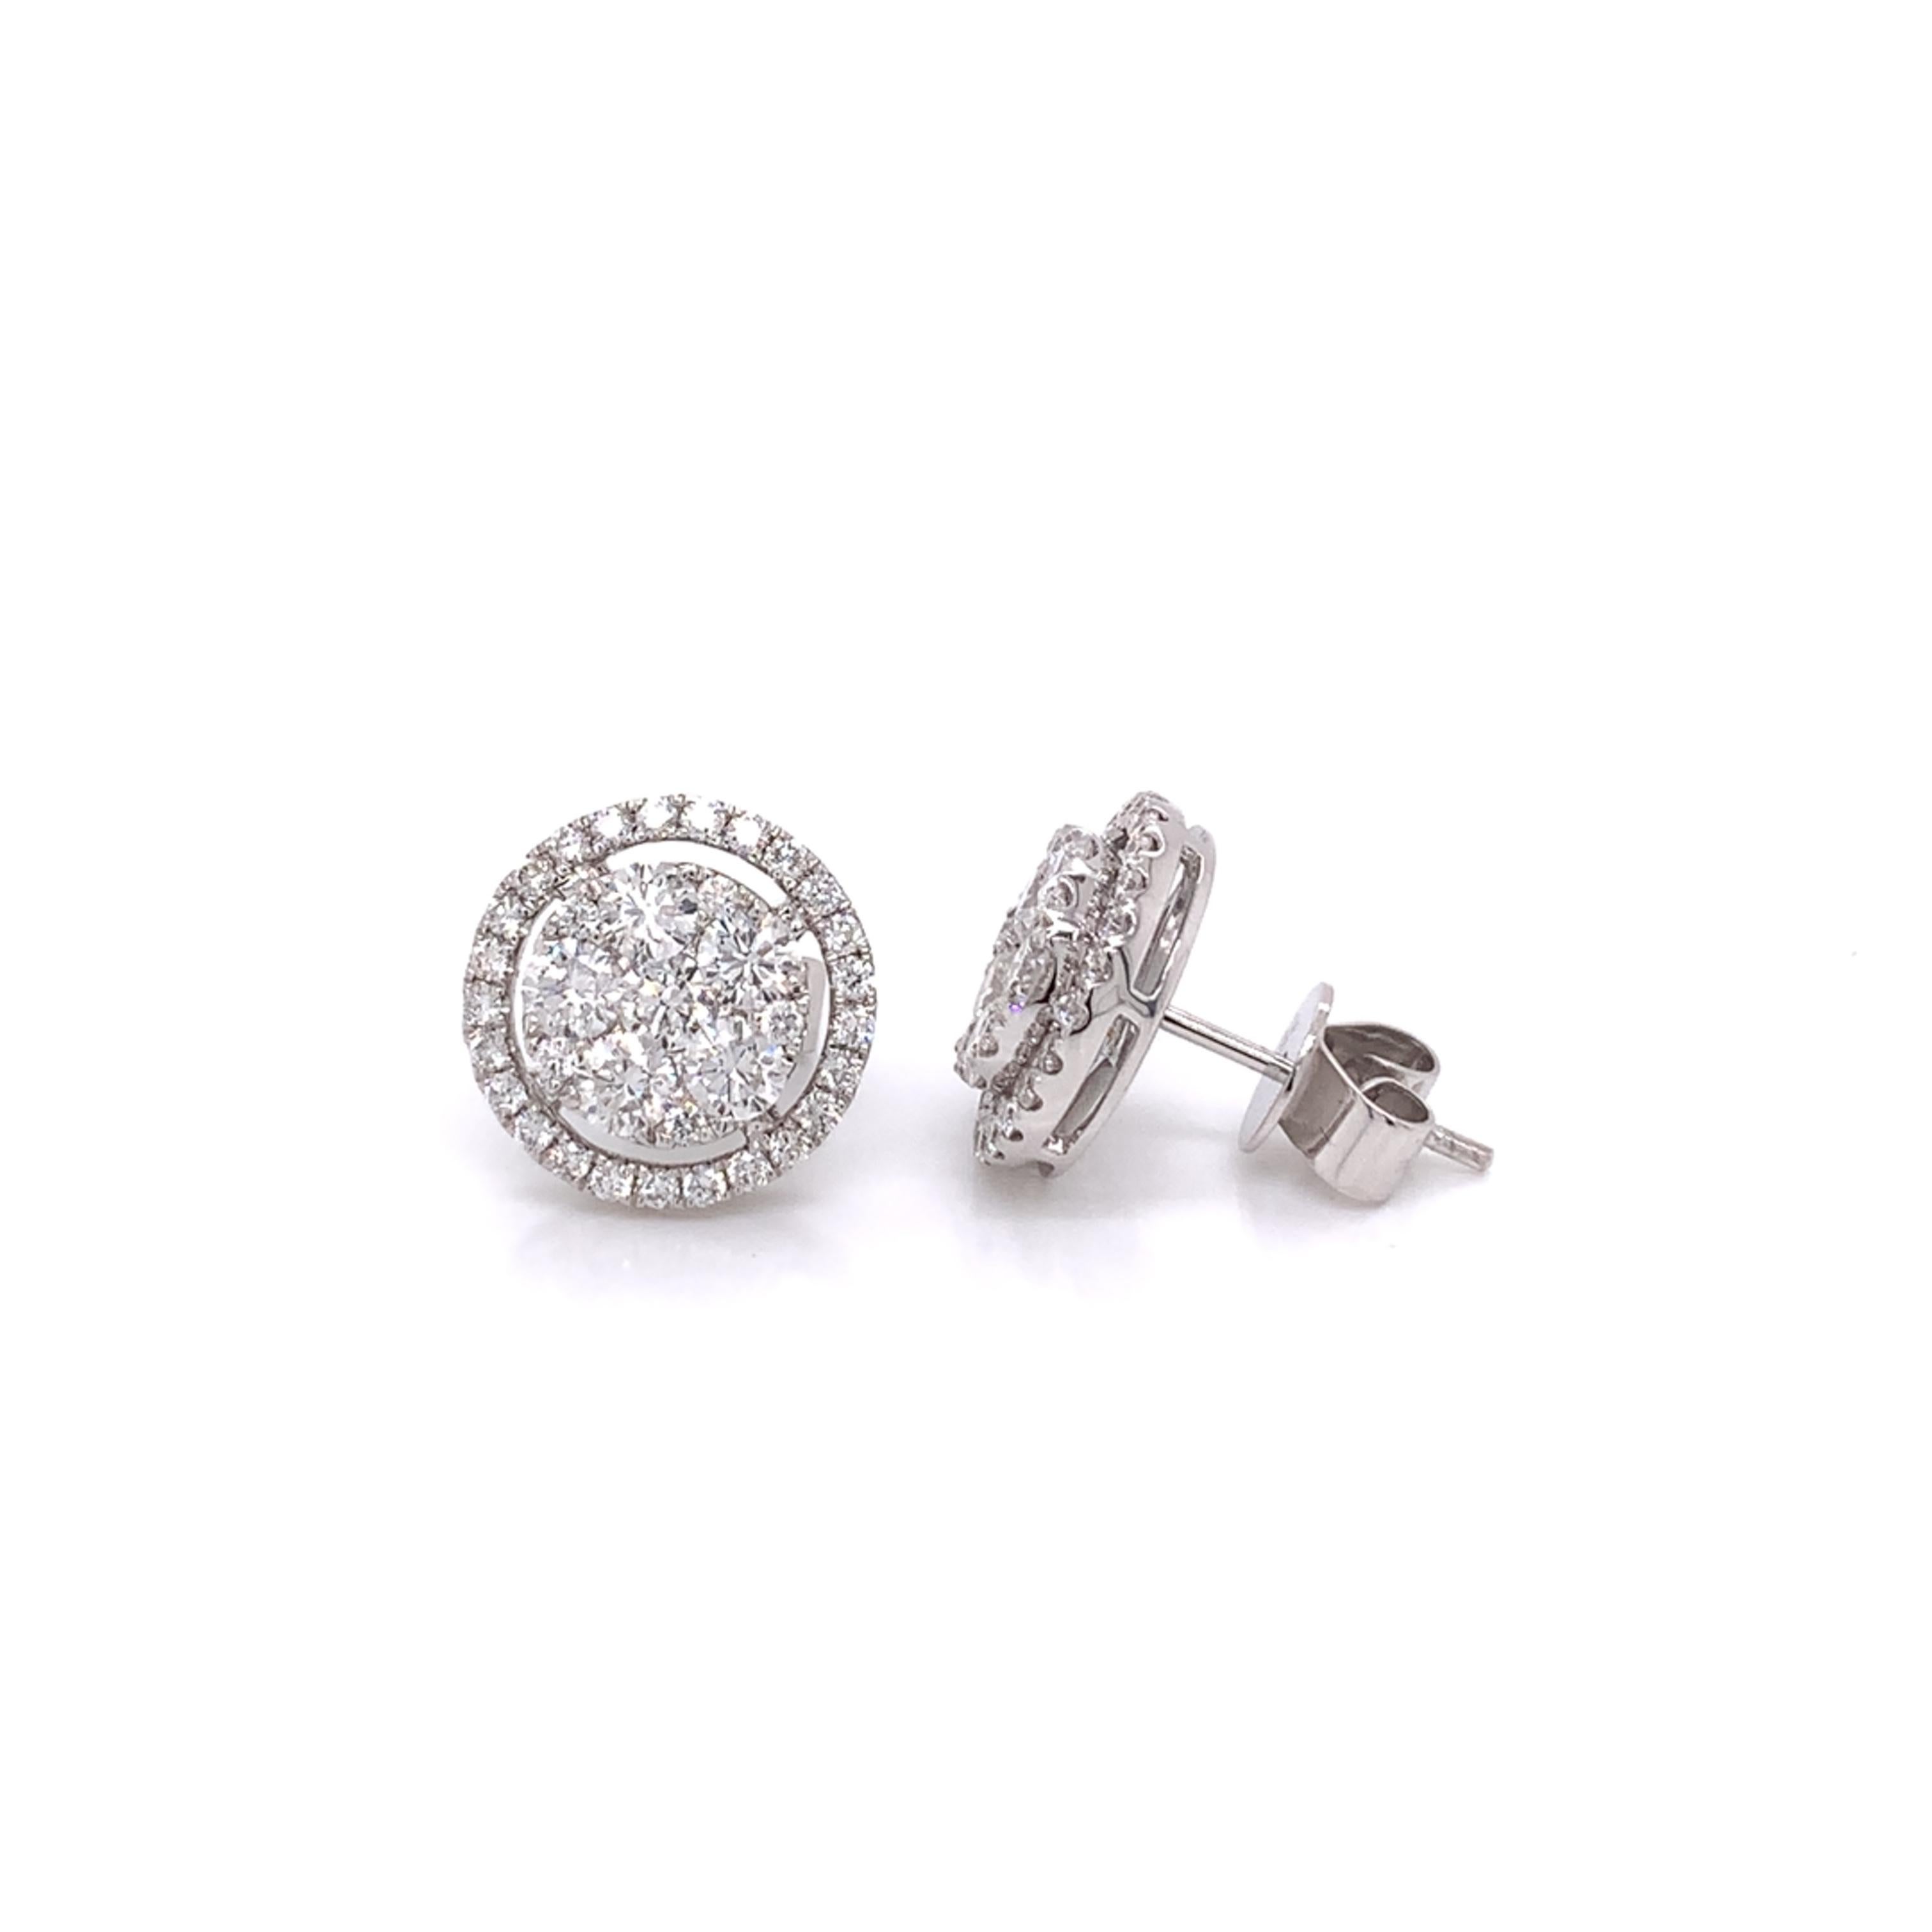 Diamond Cluster Earrings made with real/natural brilliant cut diamonds. Total Diamond Weight: 2.06cts. Diamond Qty: 72 (round diamonds). Color: G-H. Clarity: VS. Mounted on 18kt white gold push-back setting. 